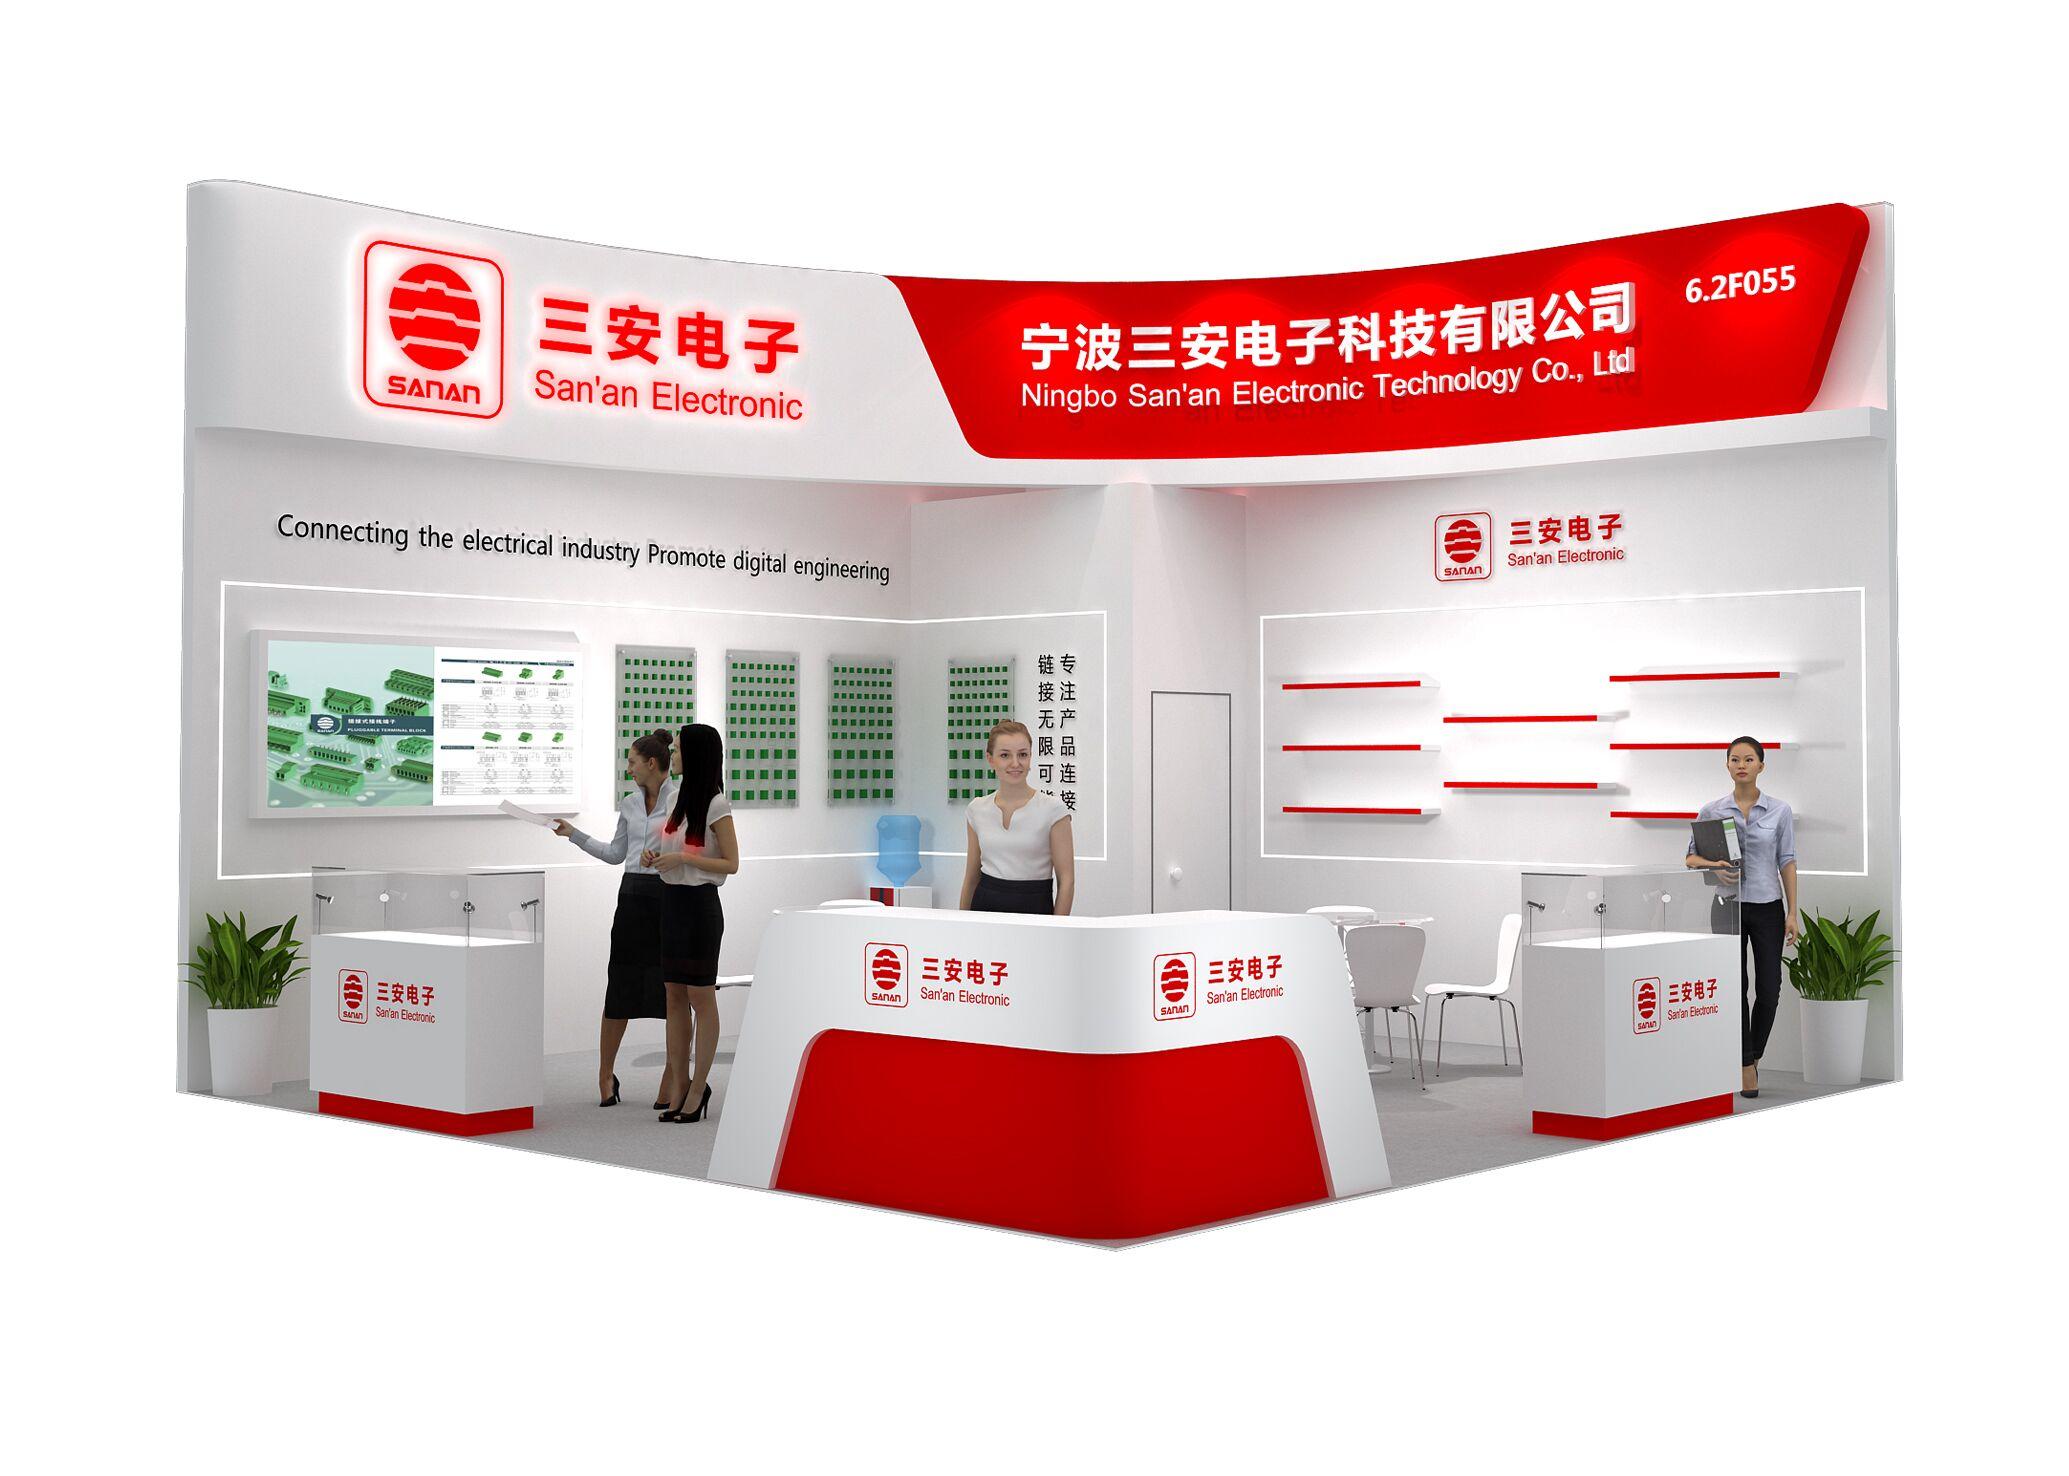 Economy at Industrial Decarbonization——Sanan Industrial Automation Exhibition